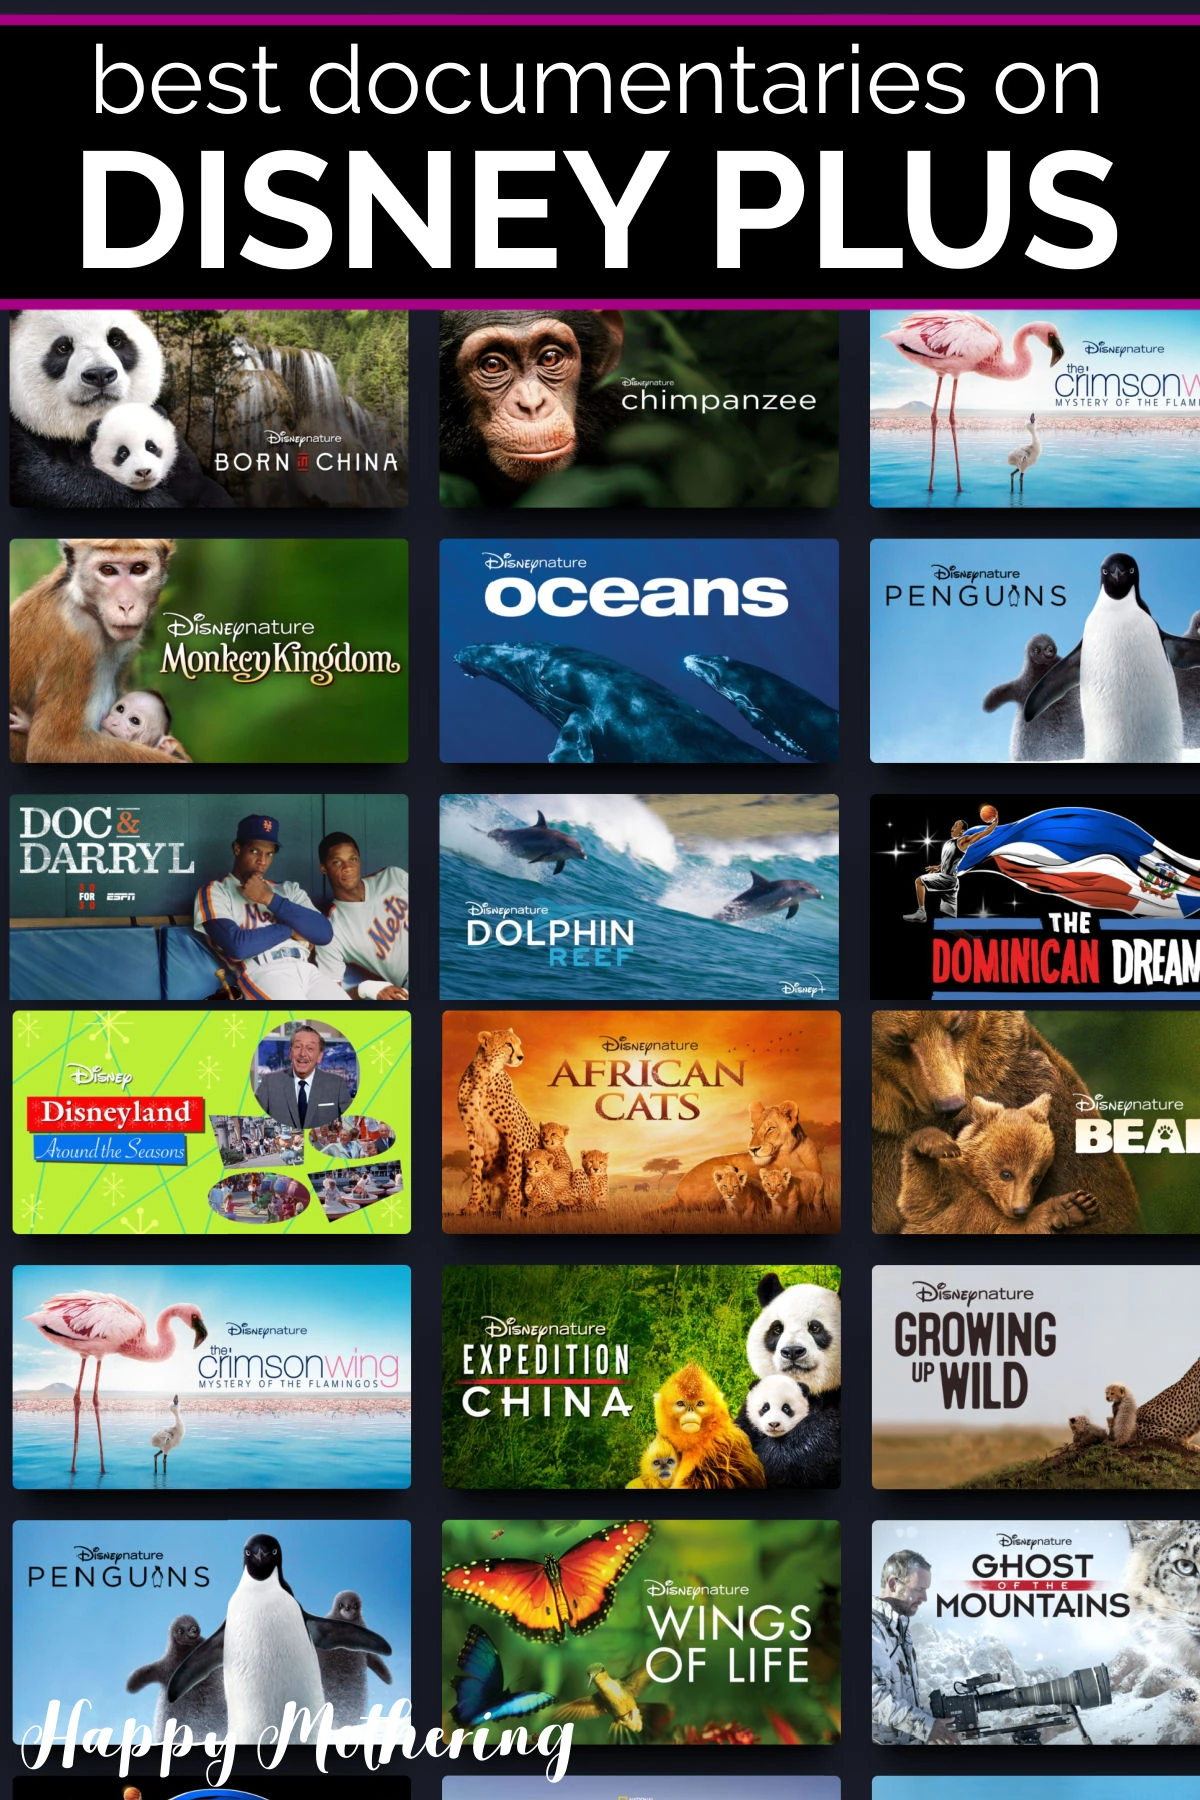 Screenshot of documentary films and shows streaming on the Disney Plus platform.